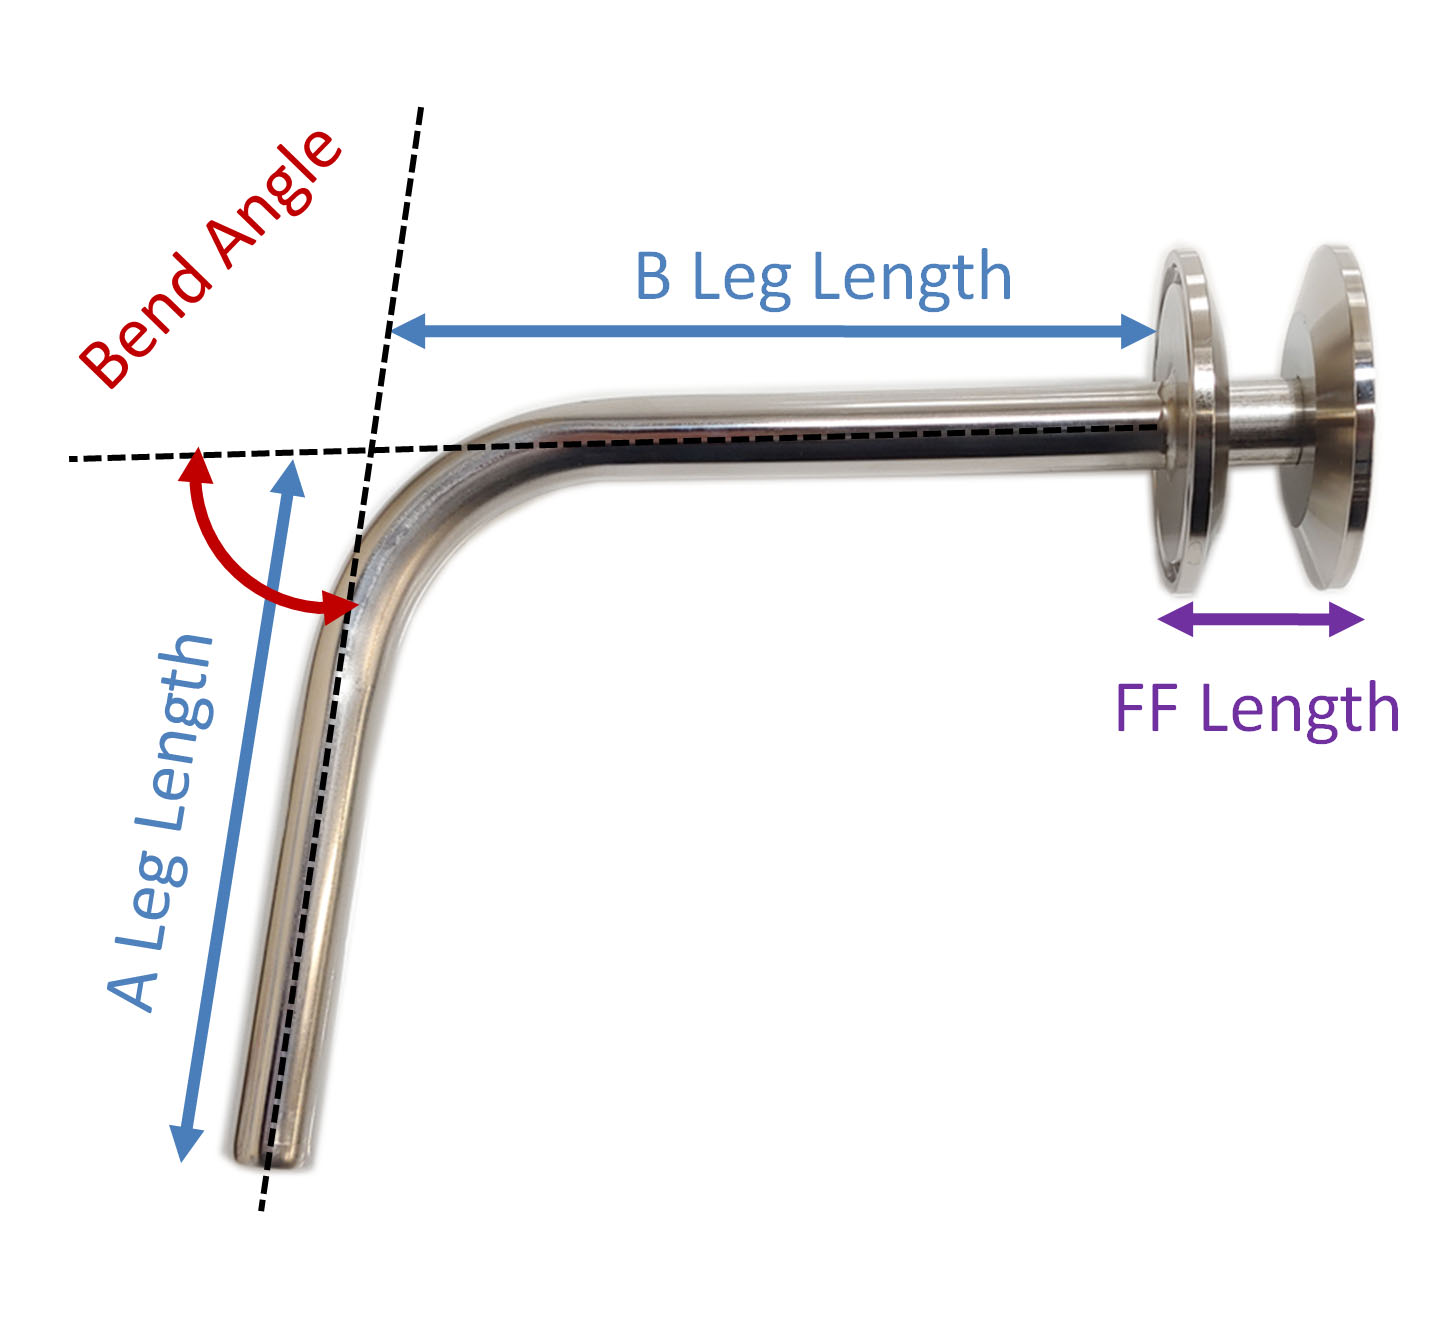 Spike Fixed Thermometer with 1.5 TC flange